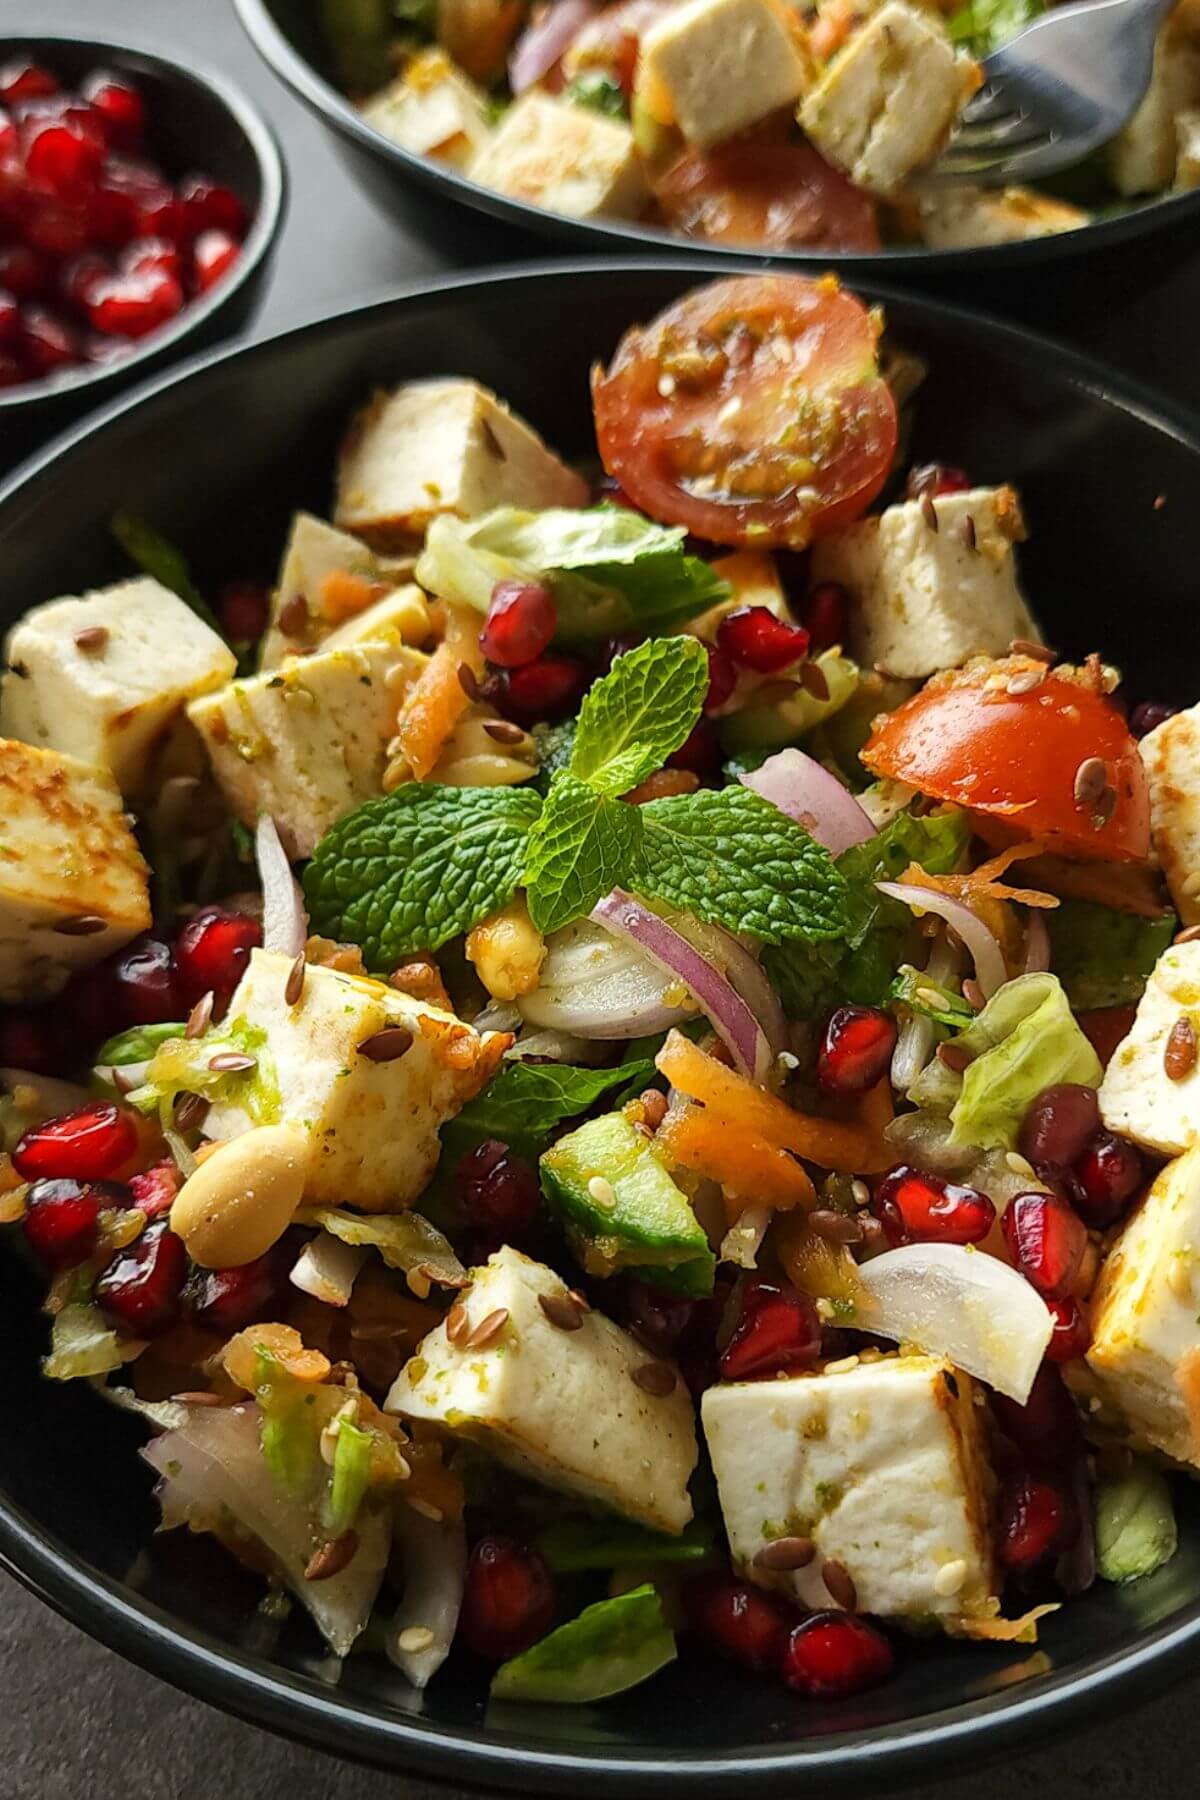 Indian salad with paneer served in a black bowl.